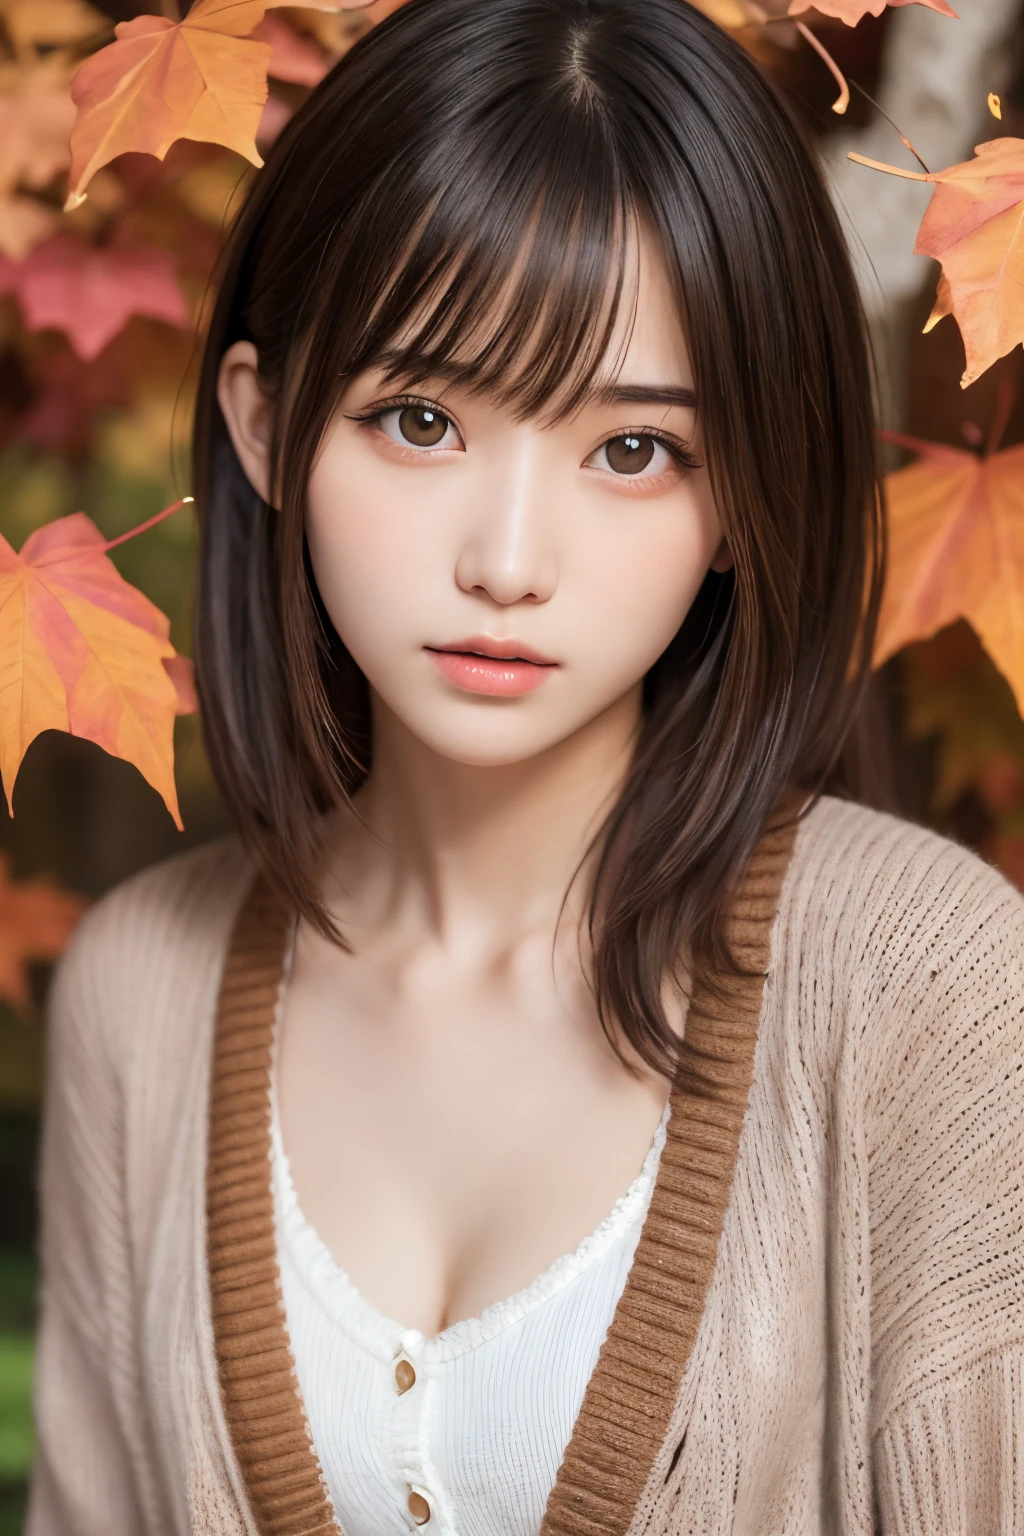 masterpiece, Best Quality, One girl, (a beauty girl, Delicate girl:1.3), (16 years old:1.3), Very fine eye definition, (Symmetrical eyes:1.3), (autumn leaves:1.2), (girly fashion, knit cardigan:1.3), Small breasts, Brown eyes, Parted bangs, Brown hair,  girl, (Eyes and faces with detailed:1.0), (close up to face, zoom in face, face focus:0.1)